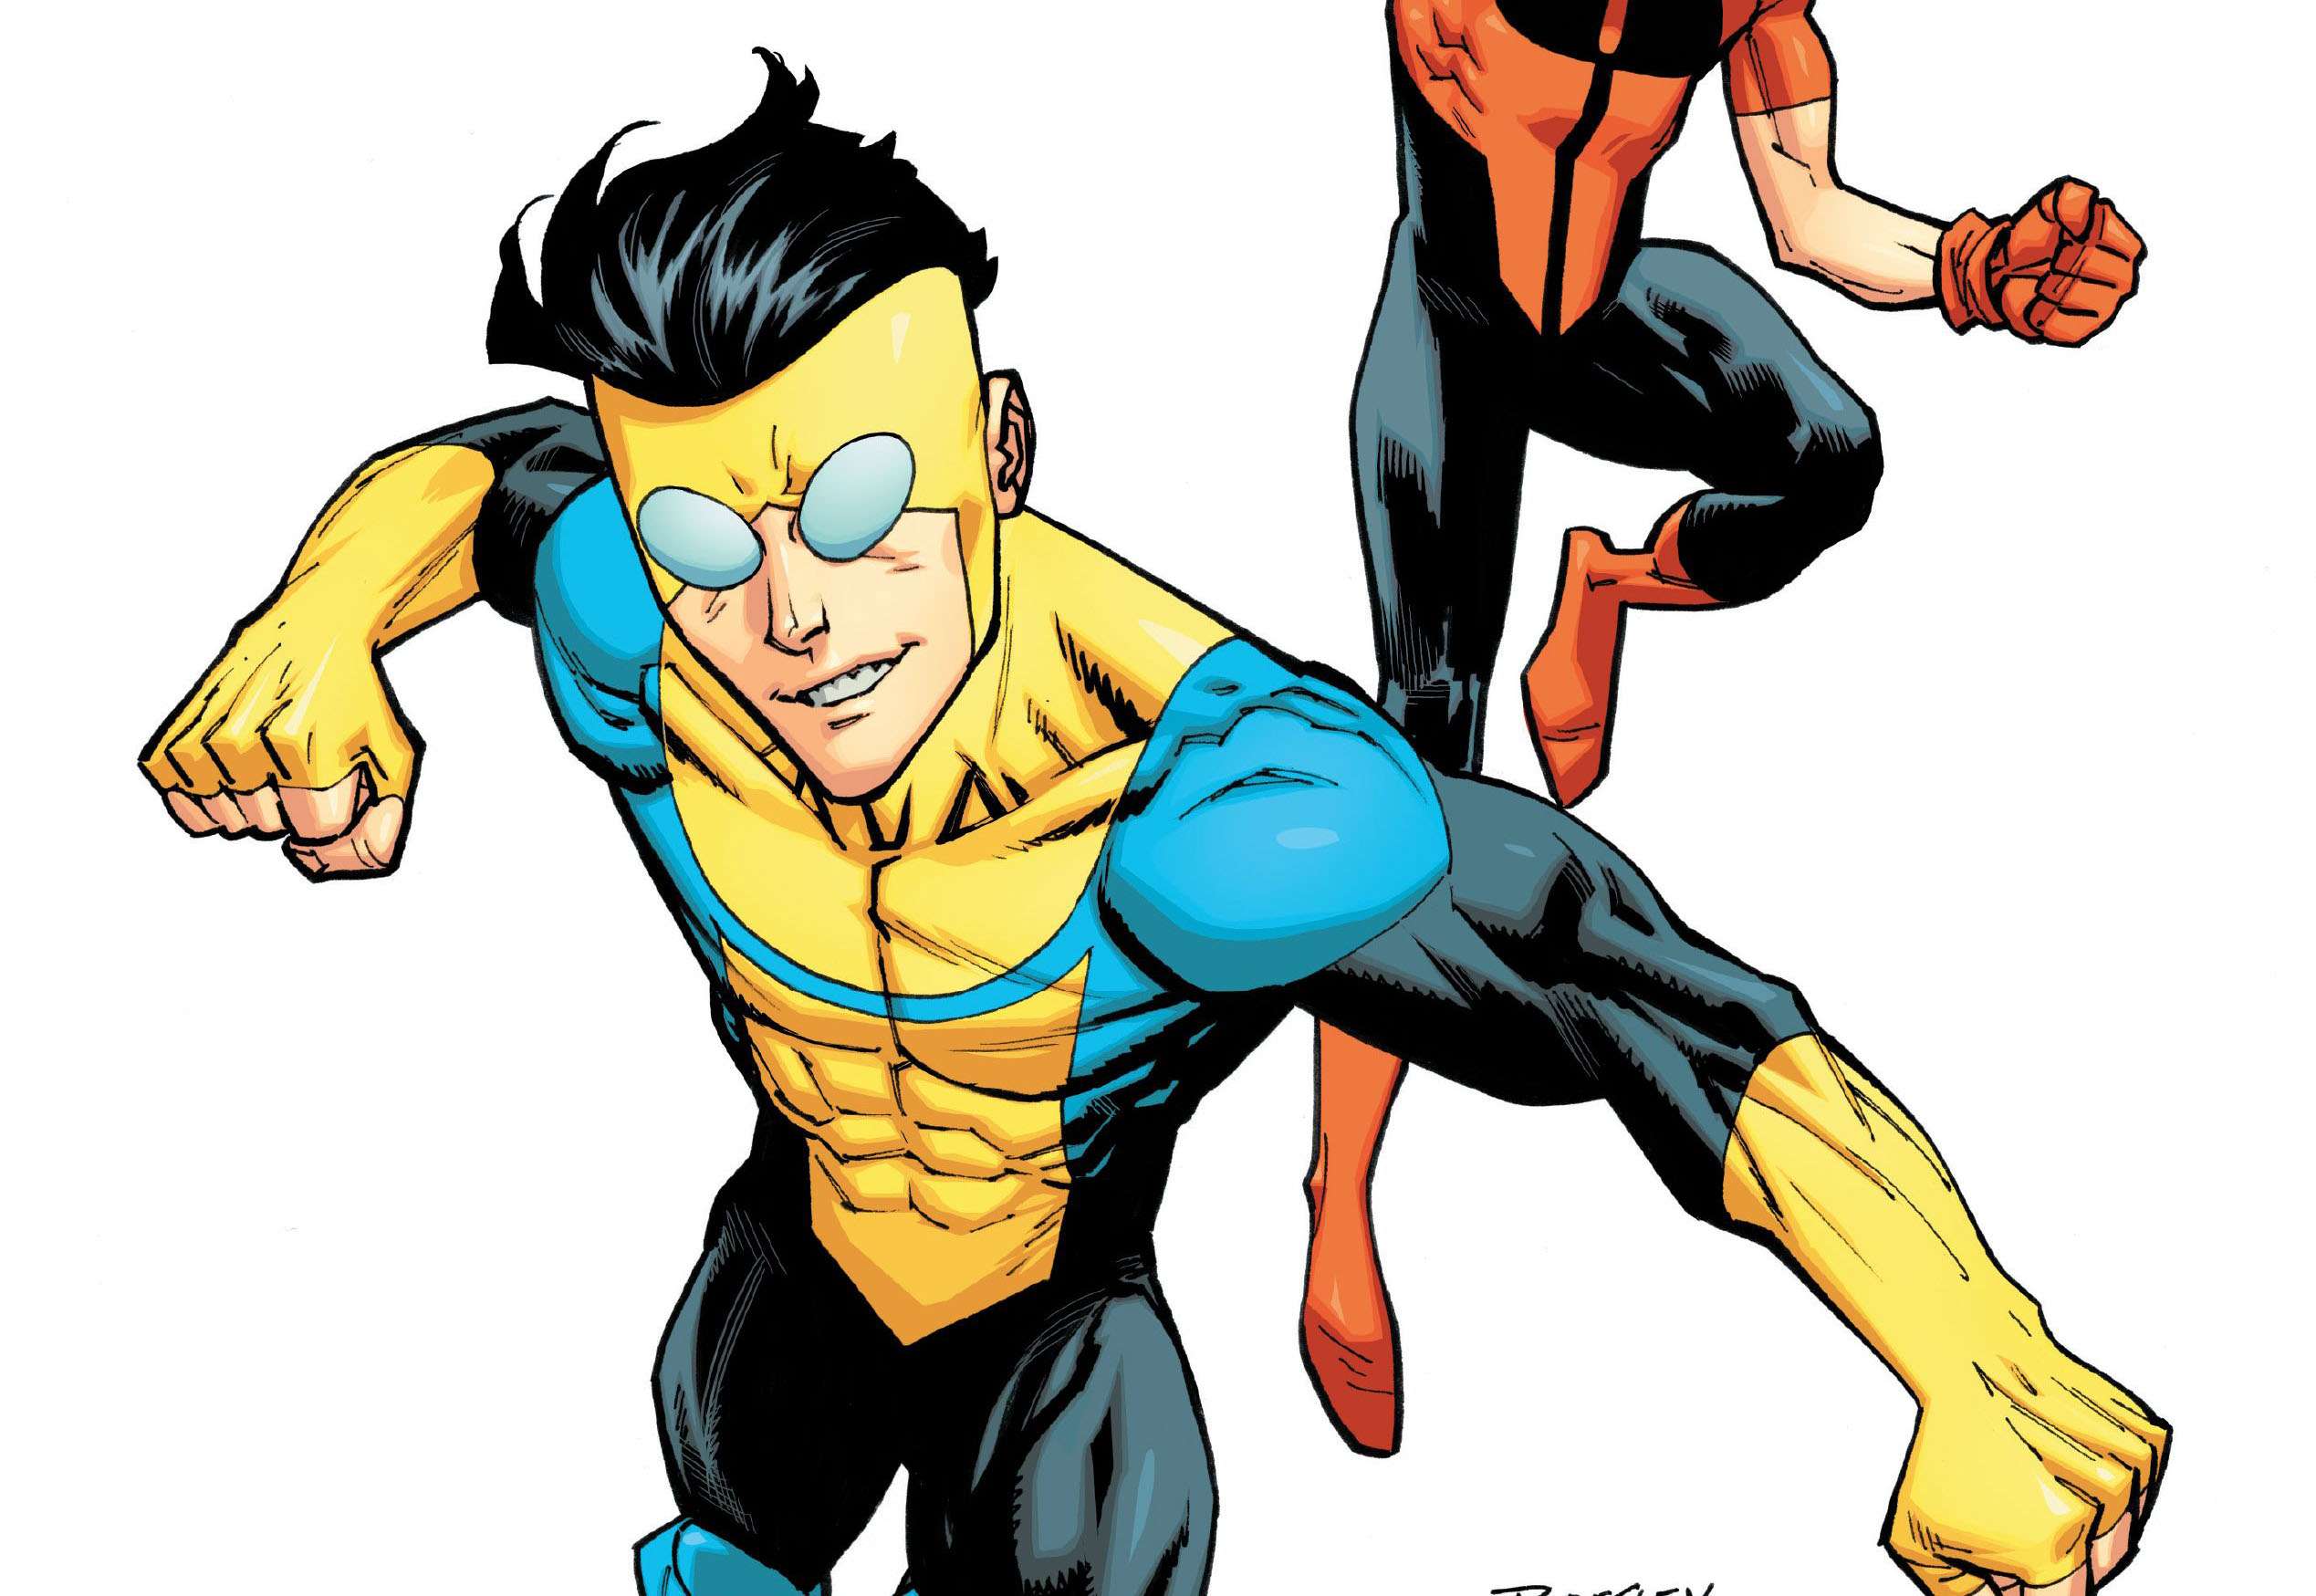 Invincible: Ubisoft to Adapt the Comics Series into a Free-to-Play